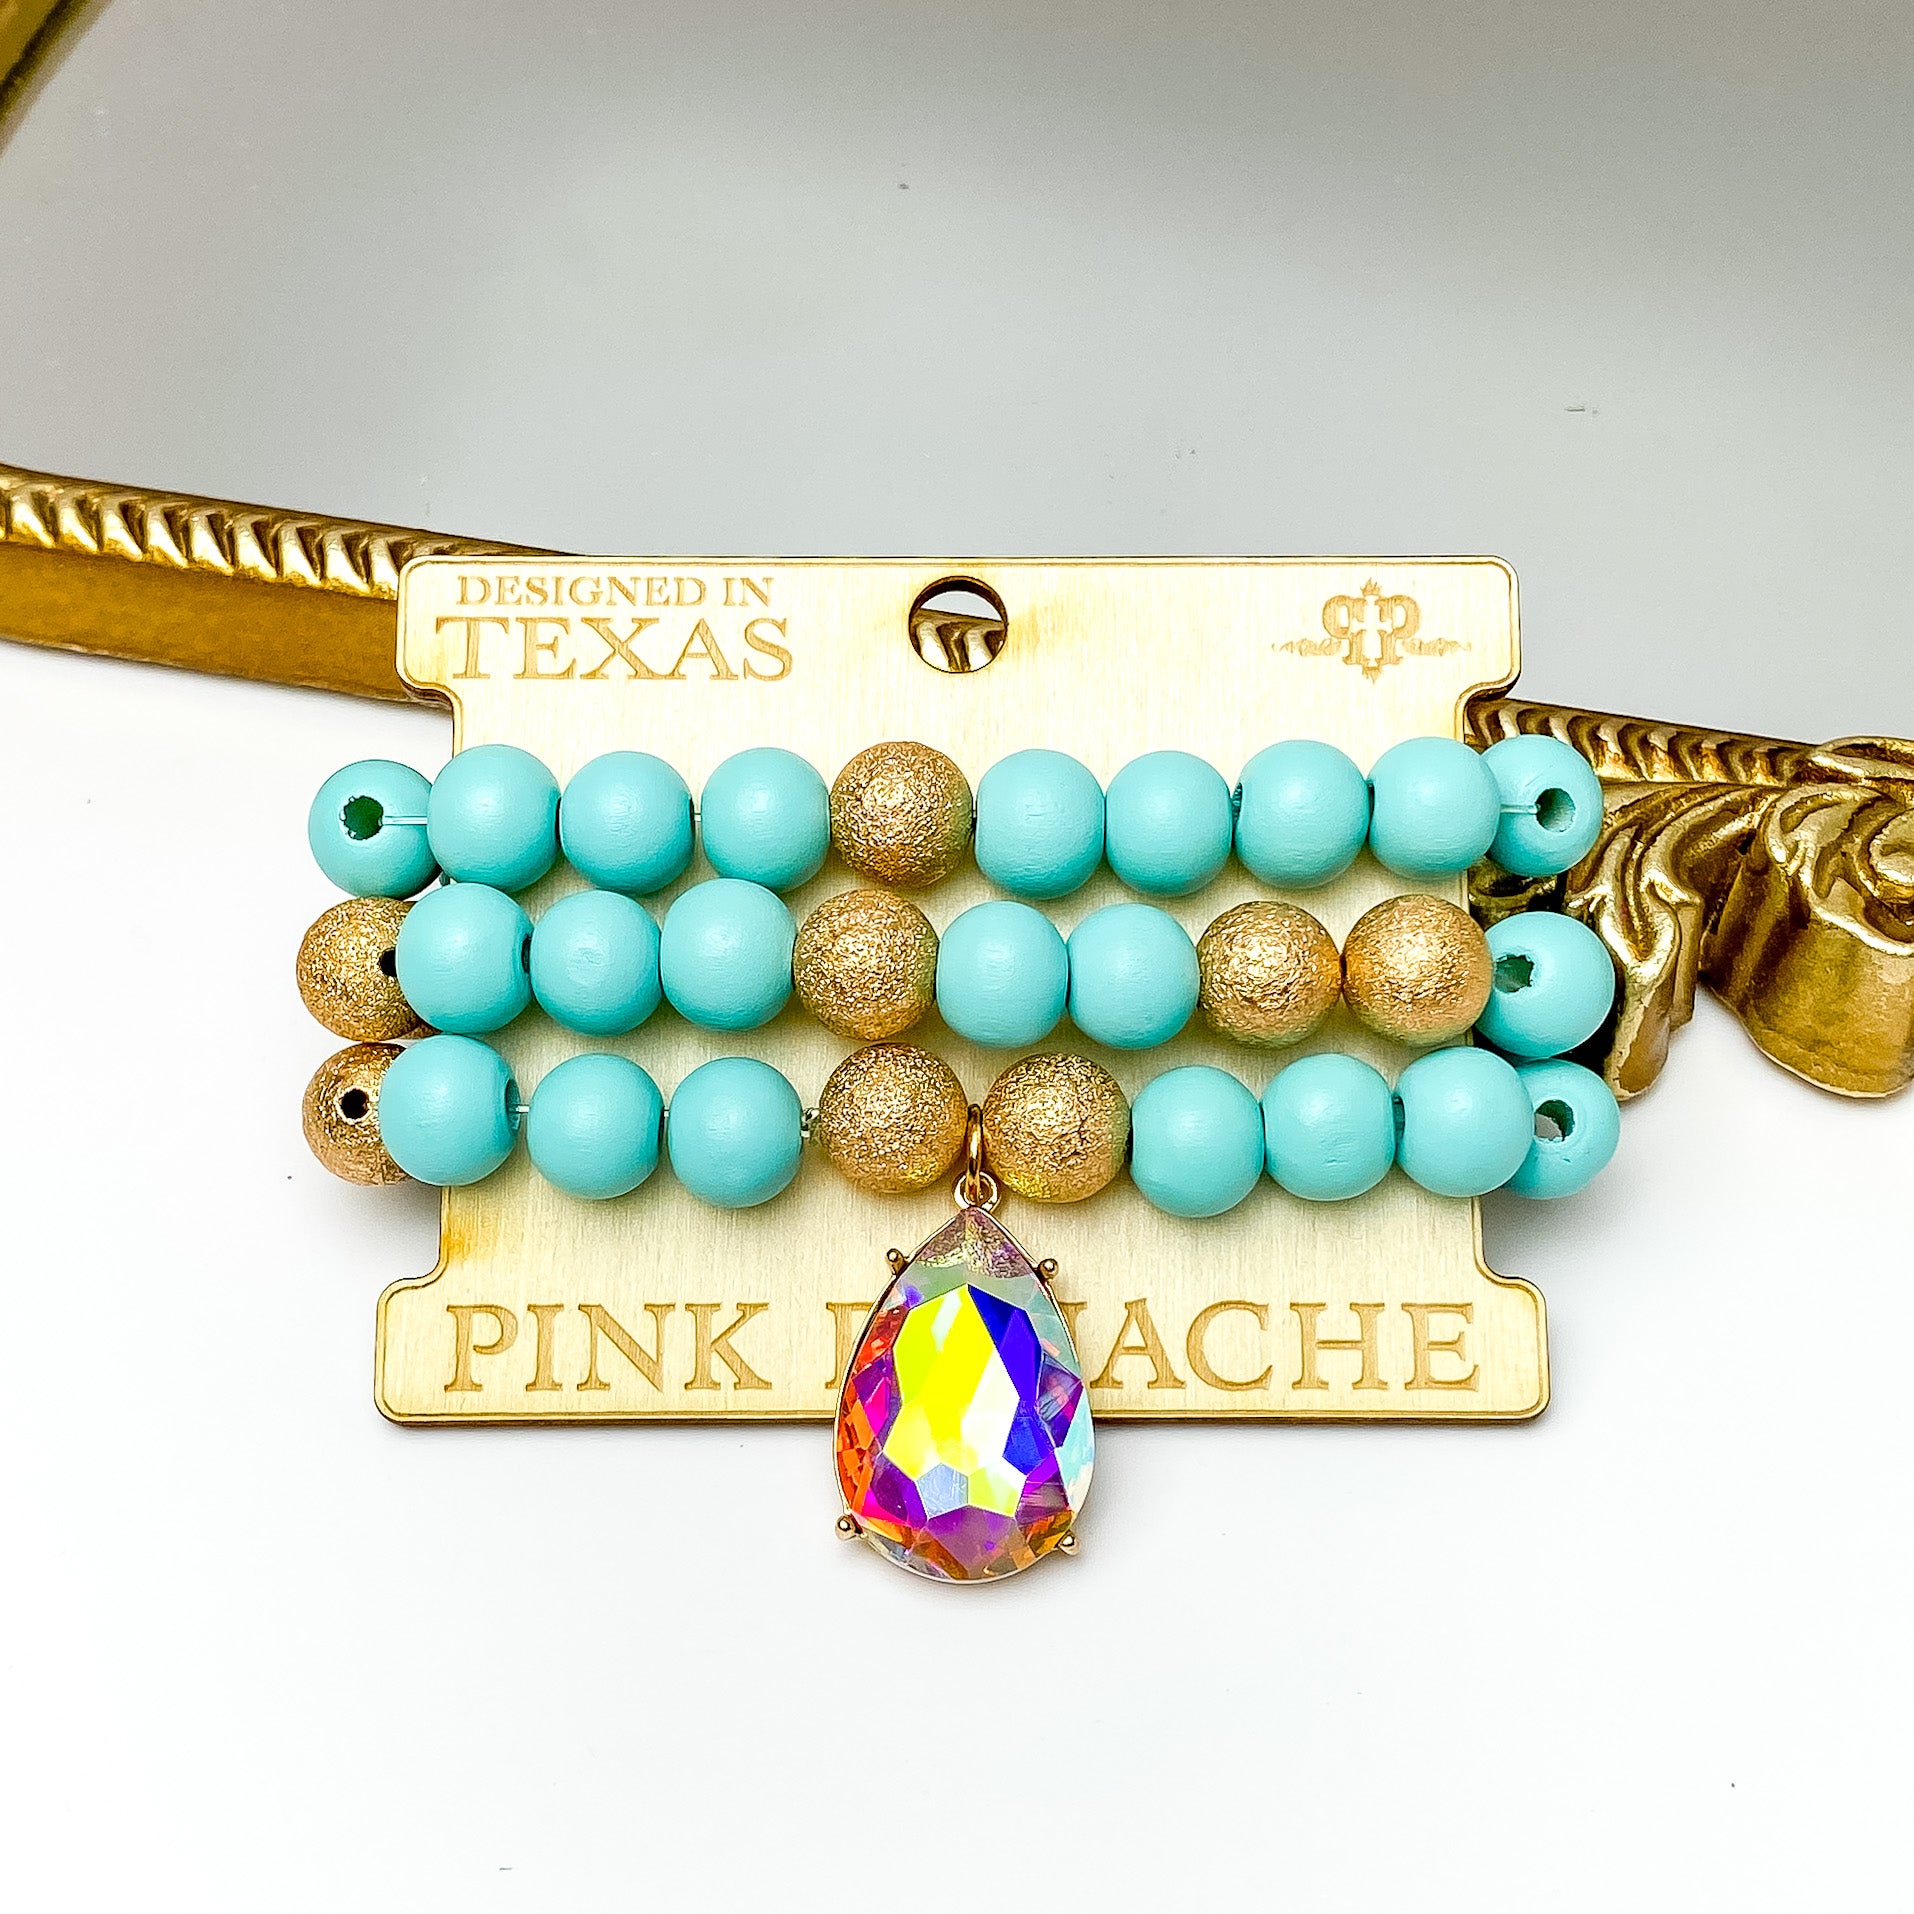 Pink Panache | Turquoise and Gold Tone Beaded Bracelet Set with Large AB Crystal Teardrop